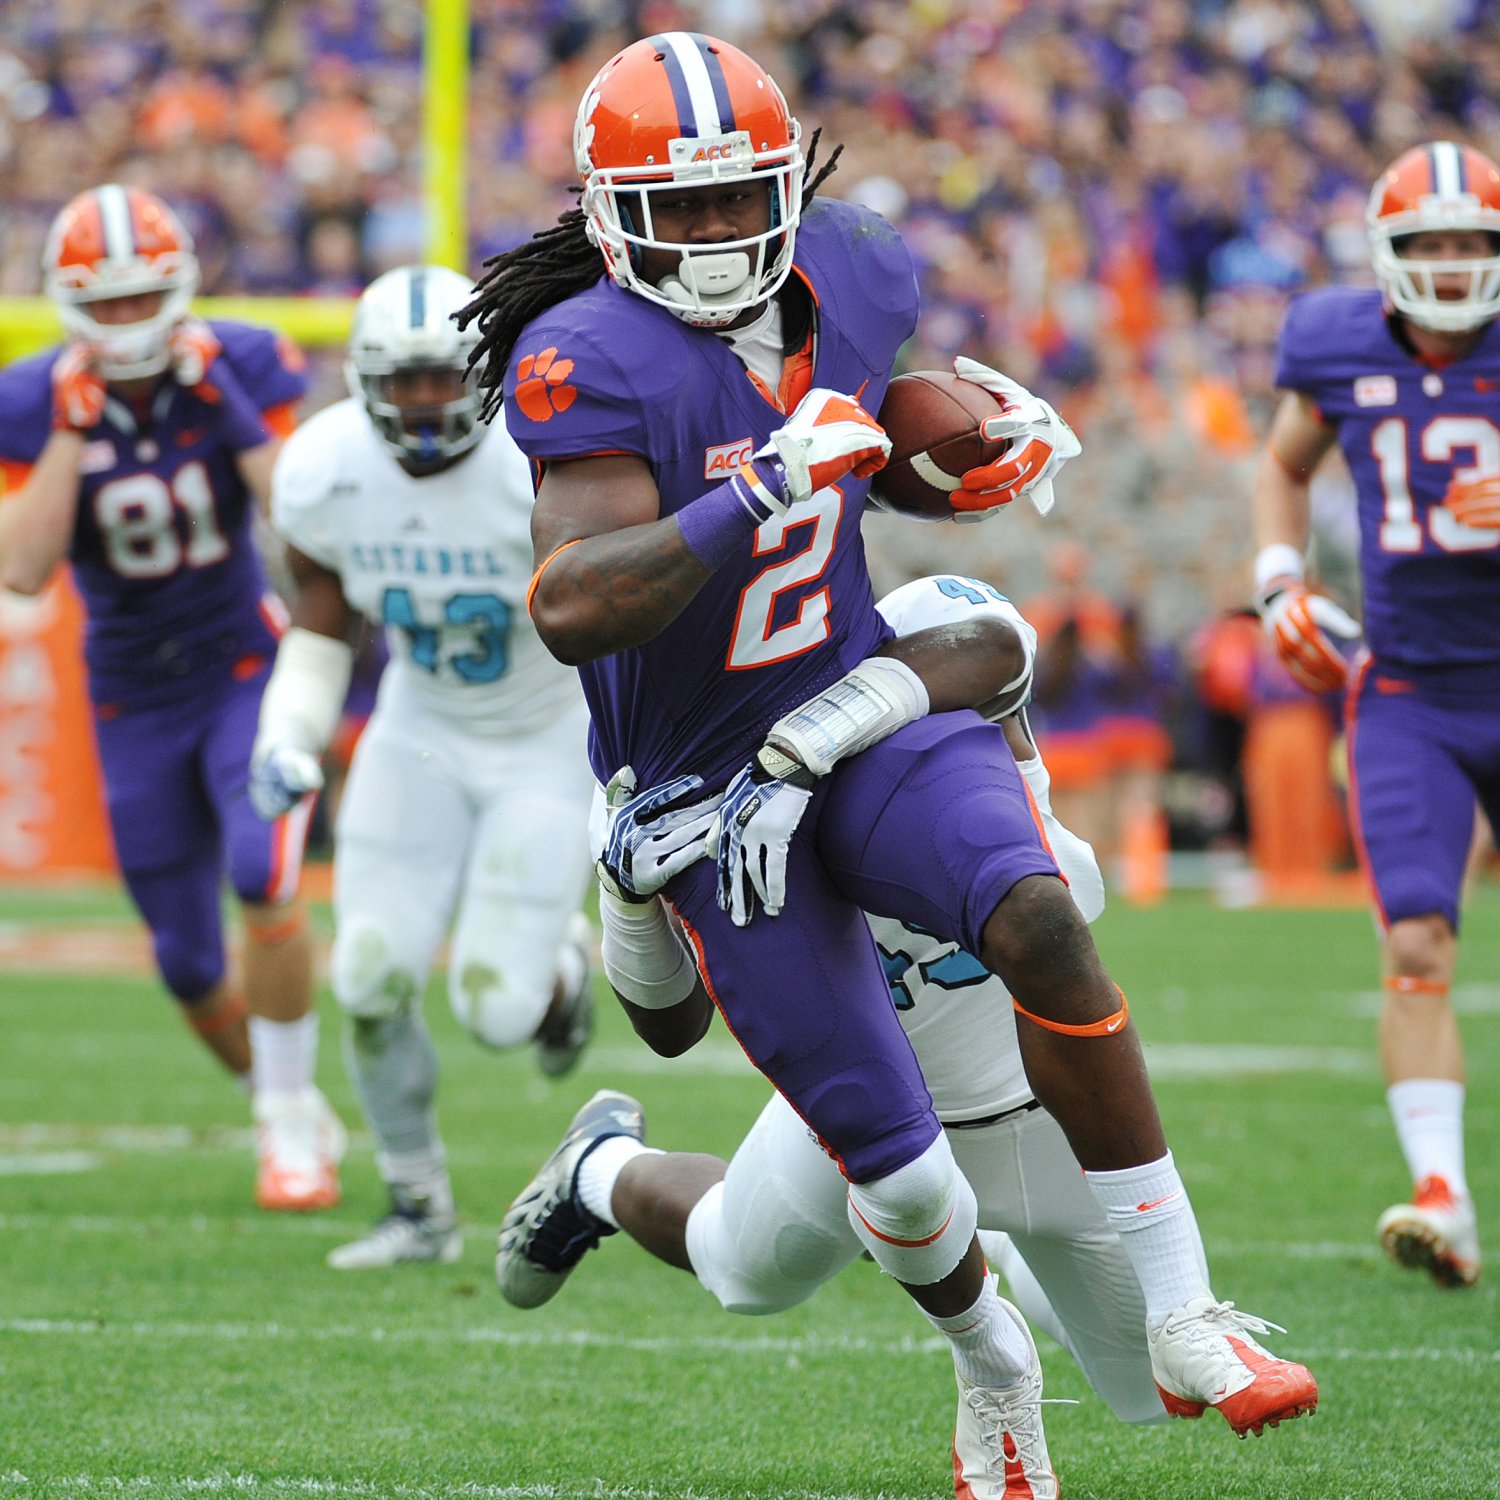 Clemson Football Predictions and Analysis for NFL DraftBound Players